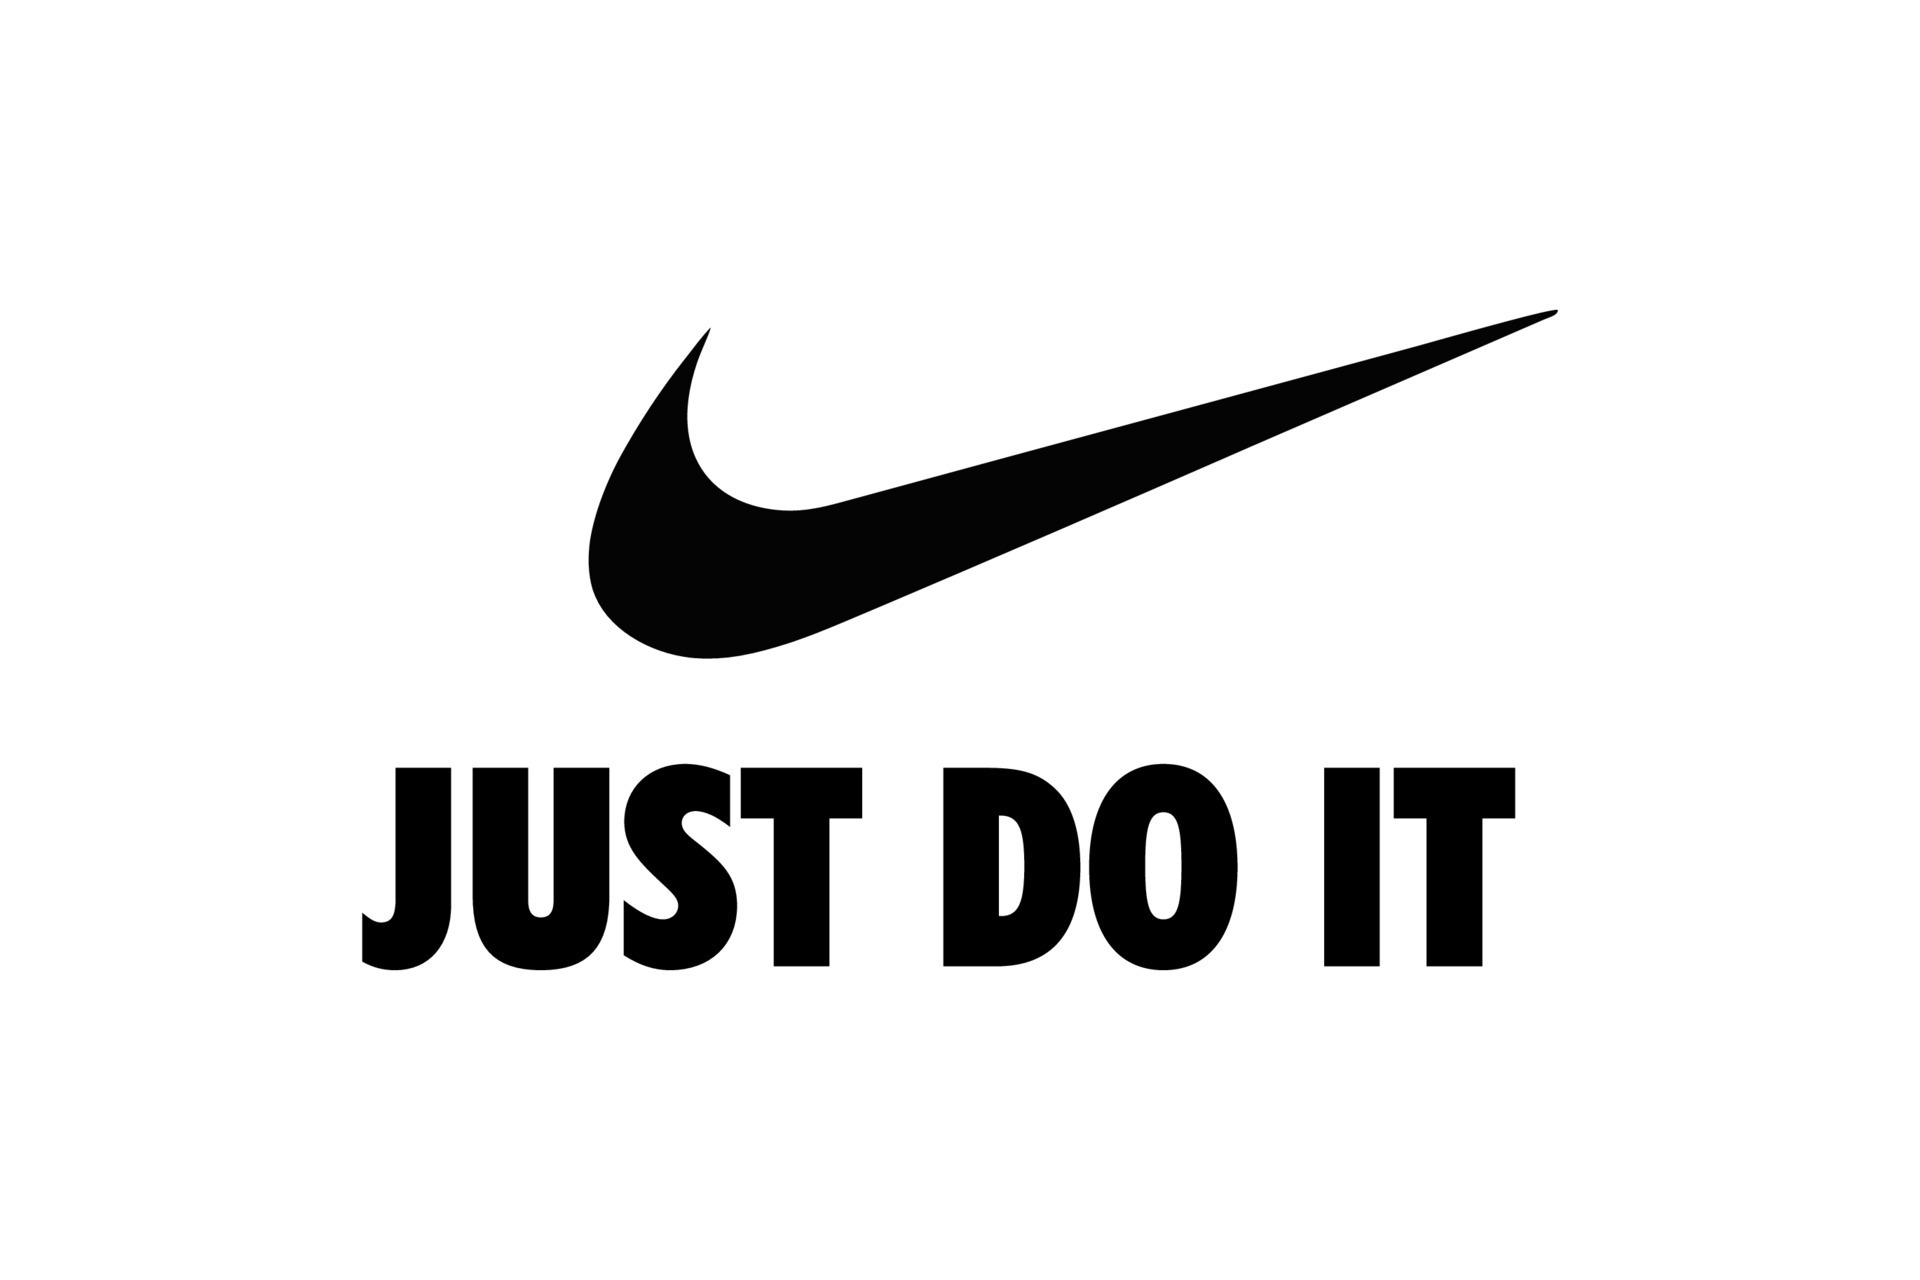 nike-logo-just-do-it-clothes-design-icon-free-vector.jpg